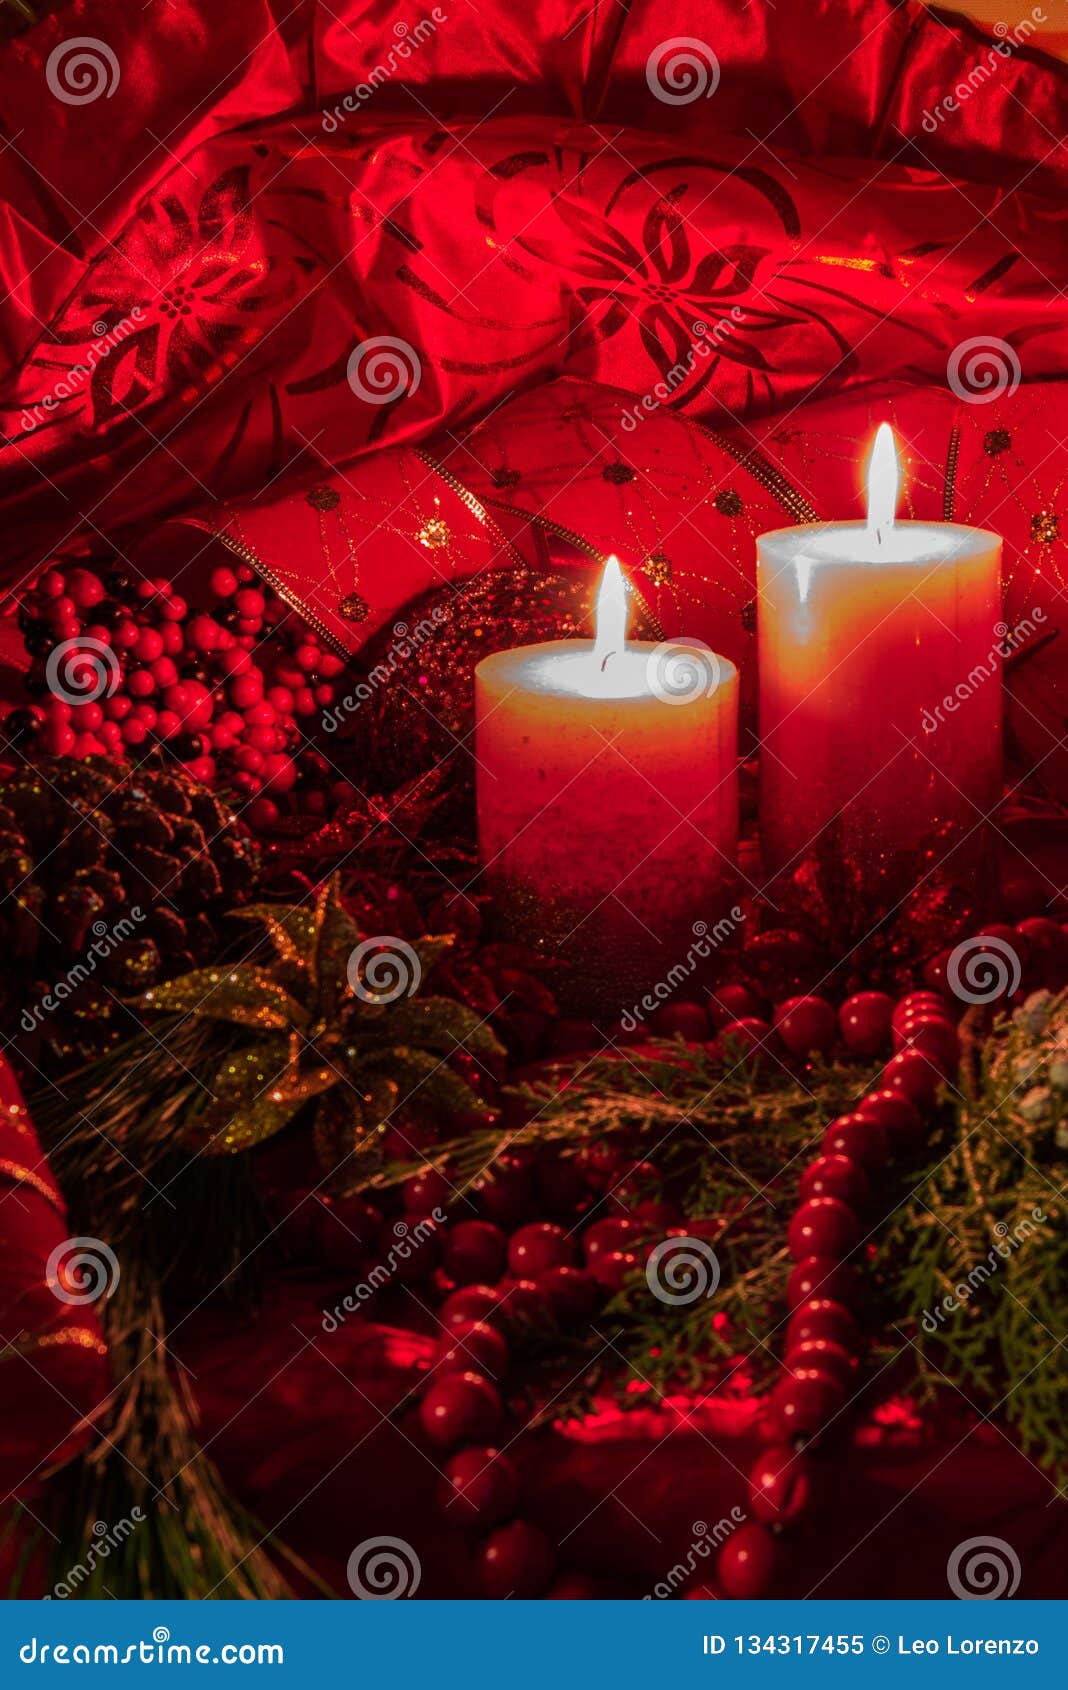 Candle Light Christmas Decoration With Red Background. Stock Image